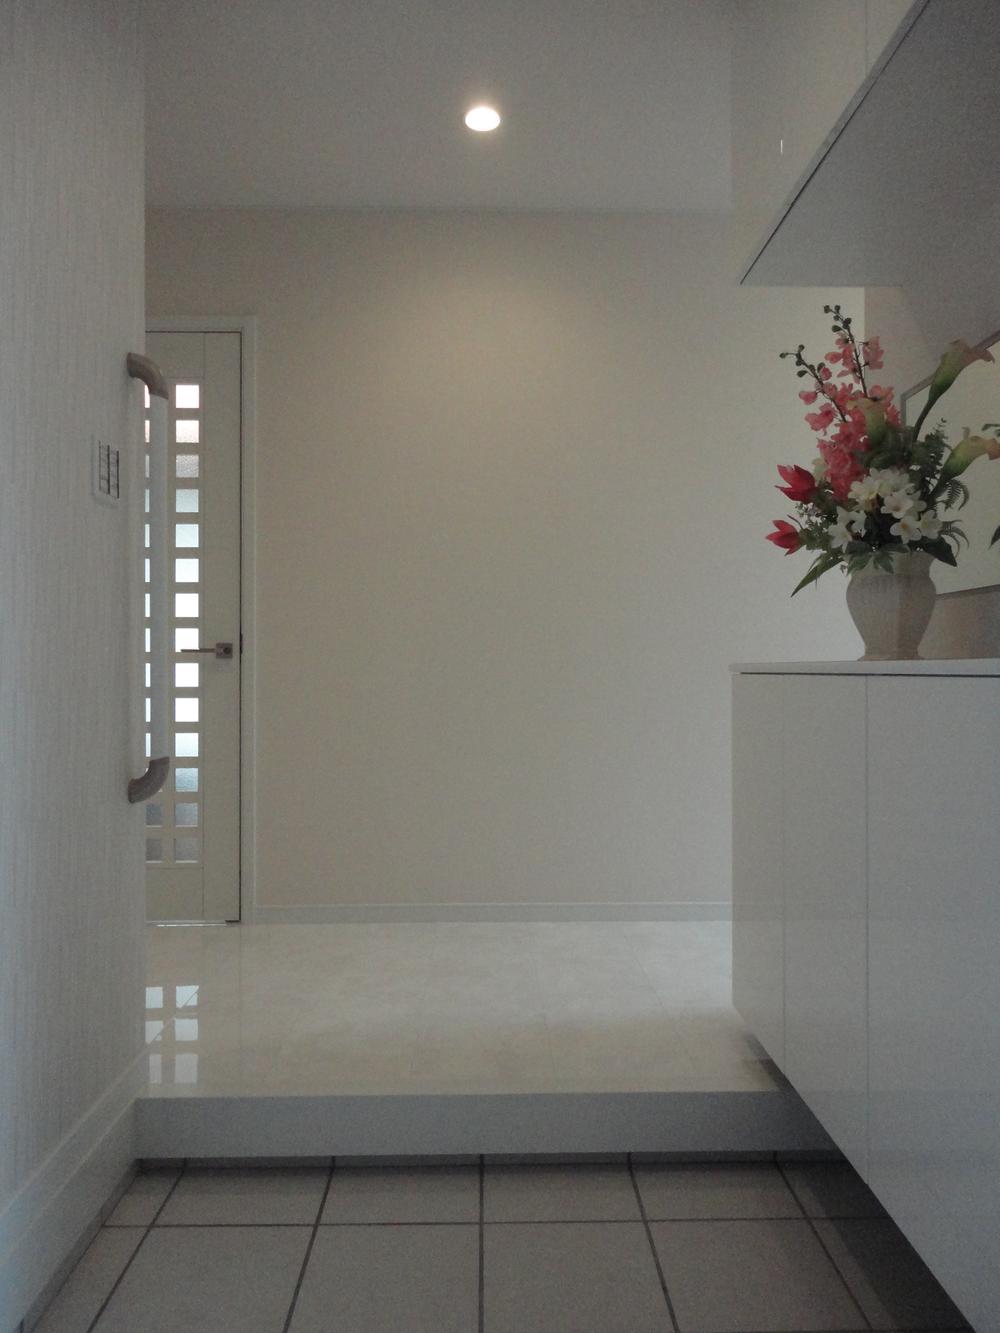 Entrance. Entrance to the floor of the marble is floating luxury (same specifications)